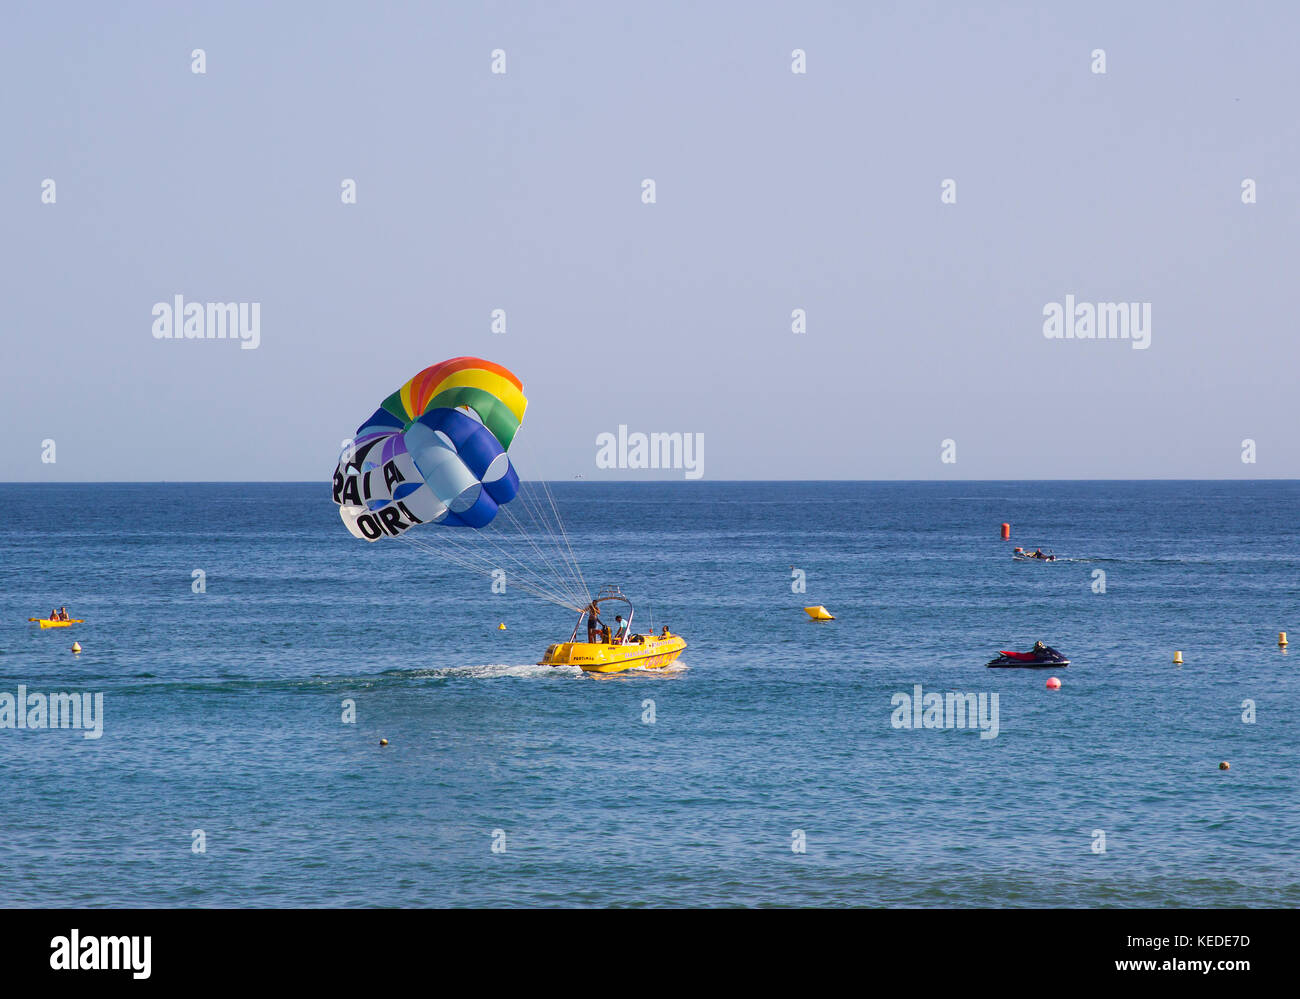 Local instructors prepare their customer for a paragliding experience from the back of their boat at the Praia Da Oura beach in Albuferia in the Portu Stock Photo